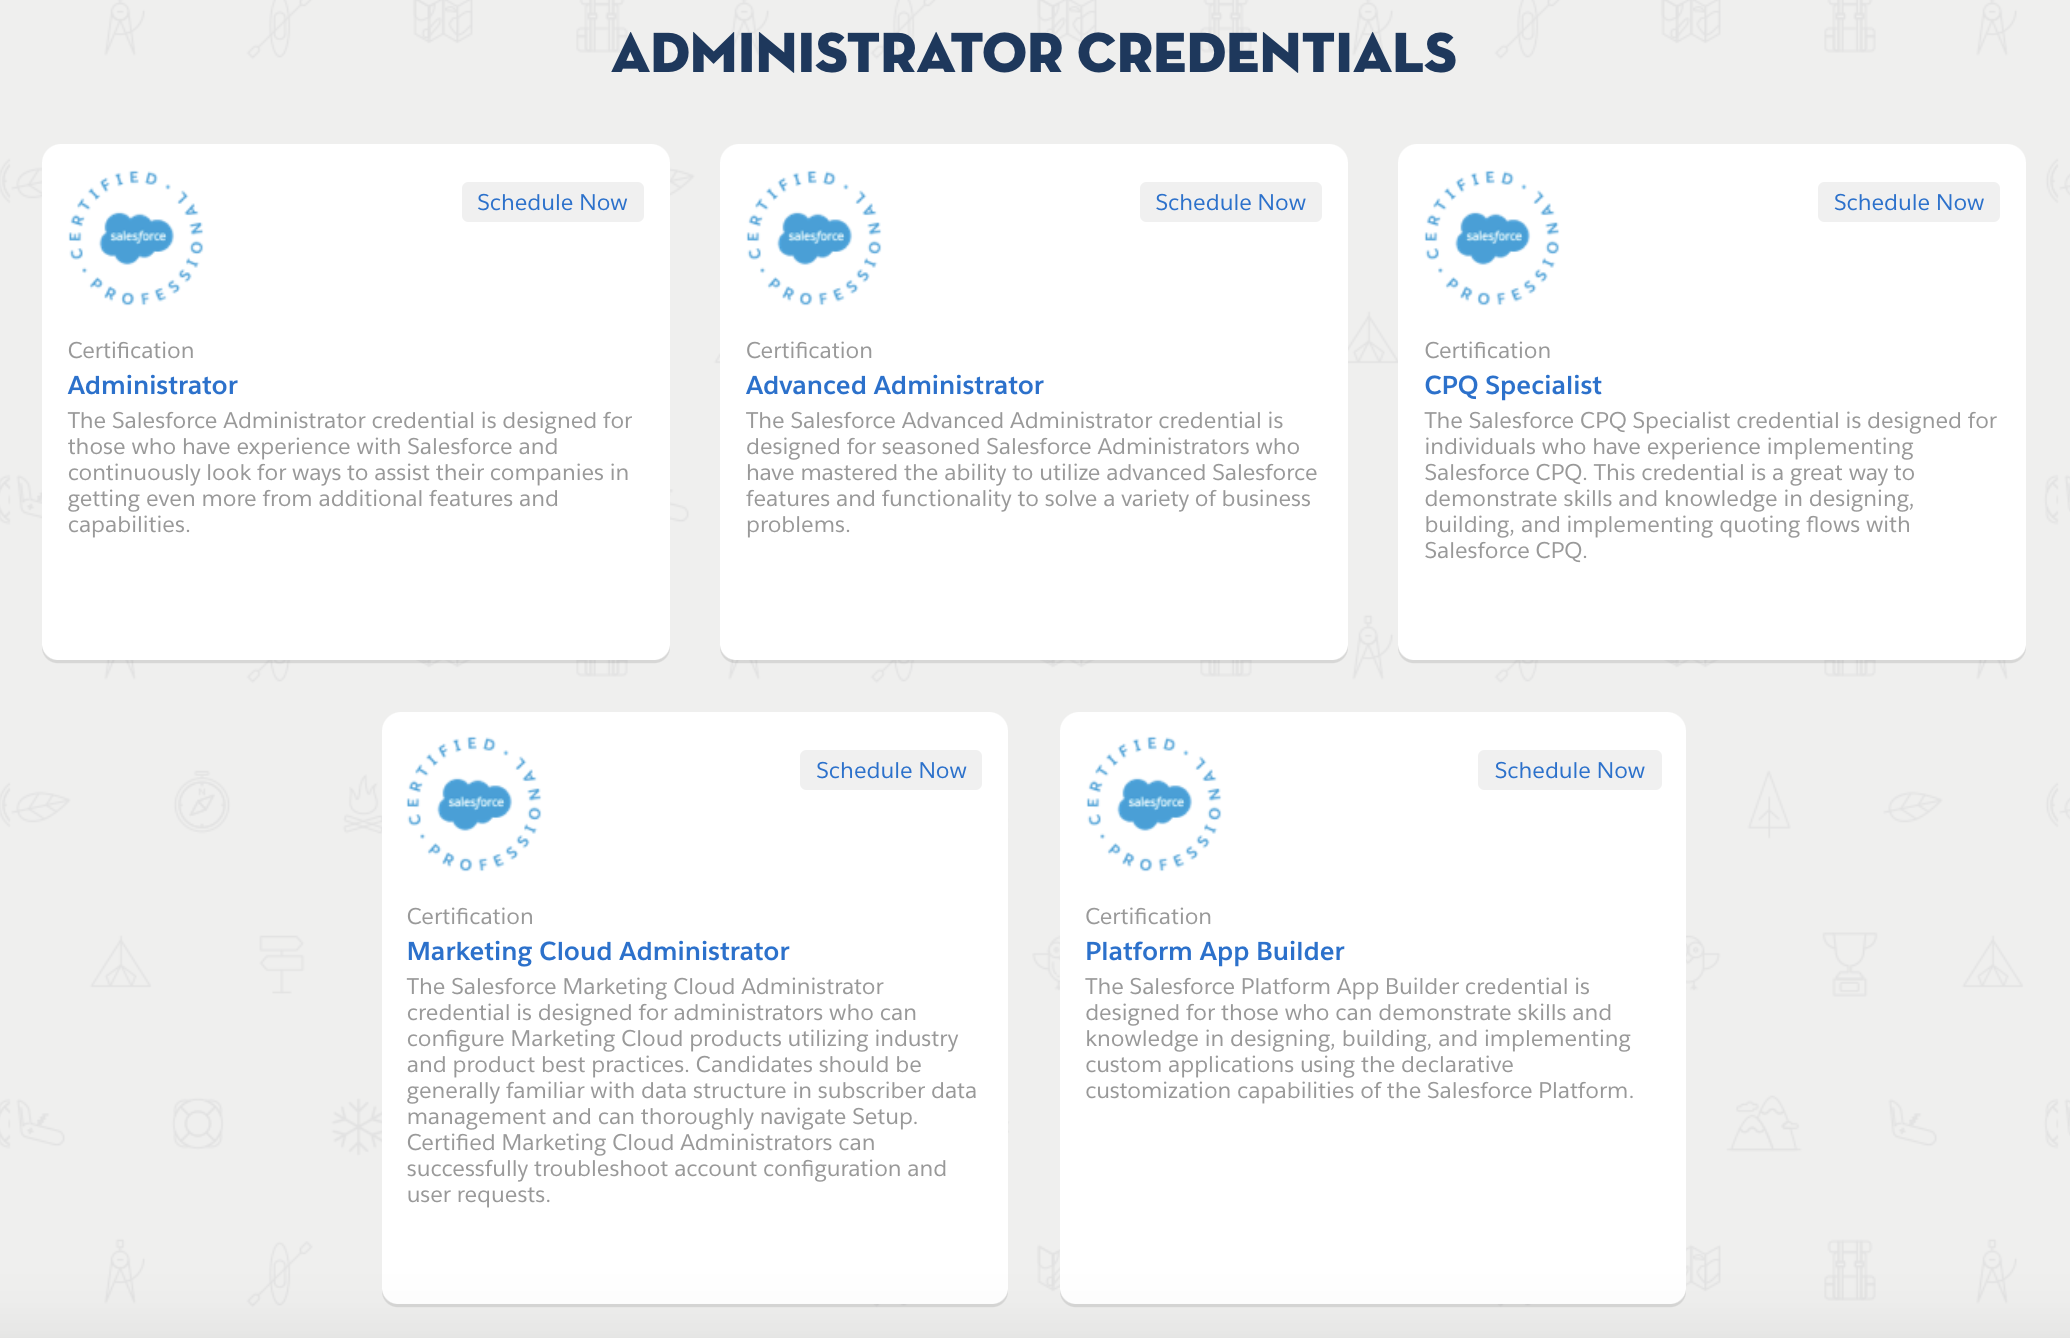 A list of Salesforce administrator certifications